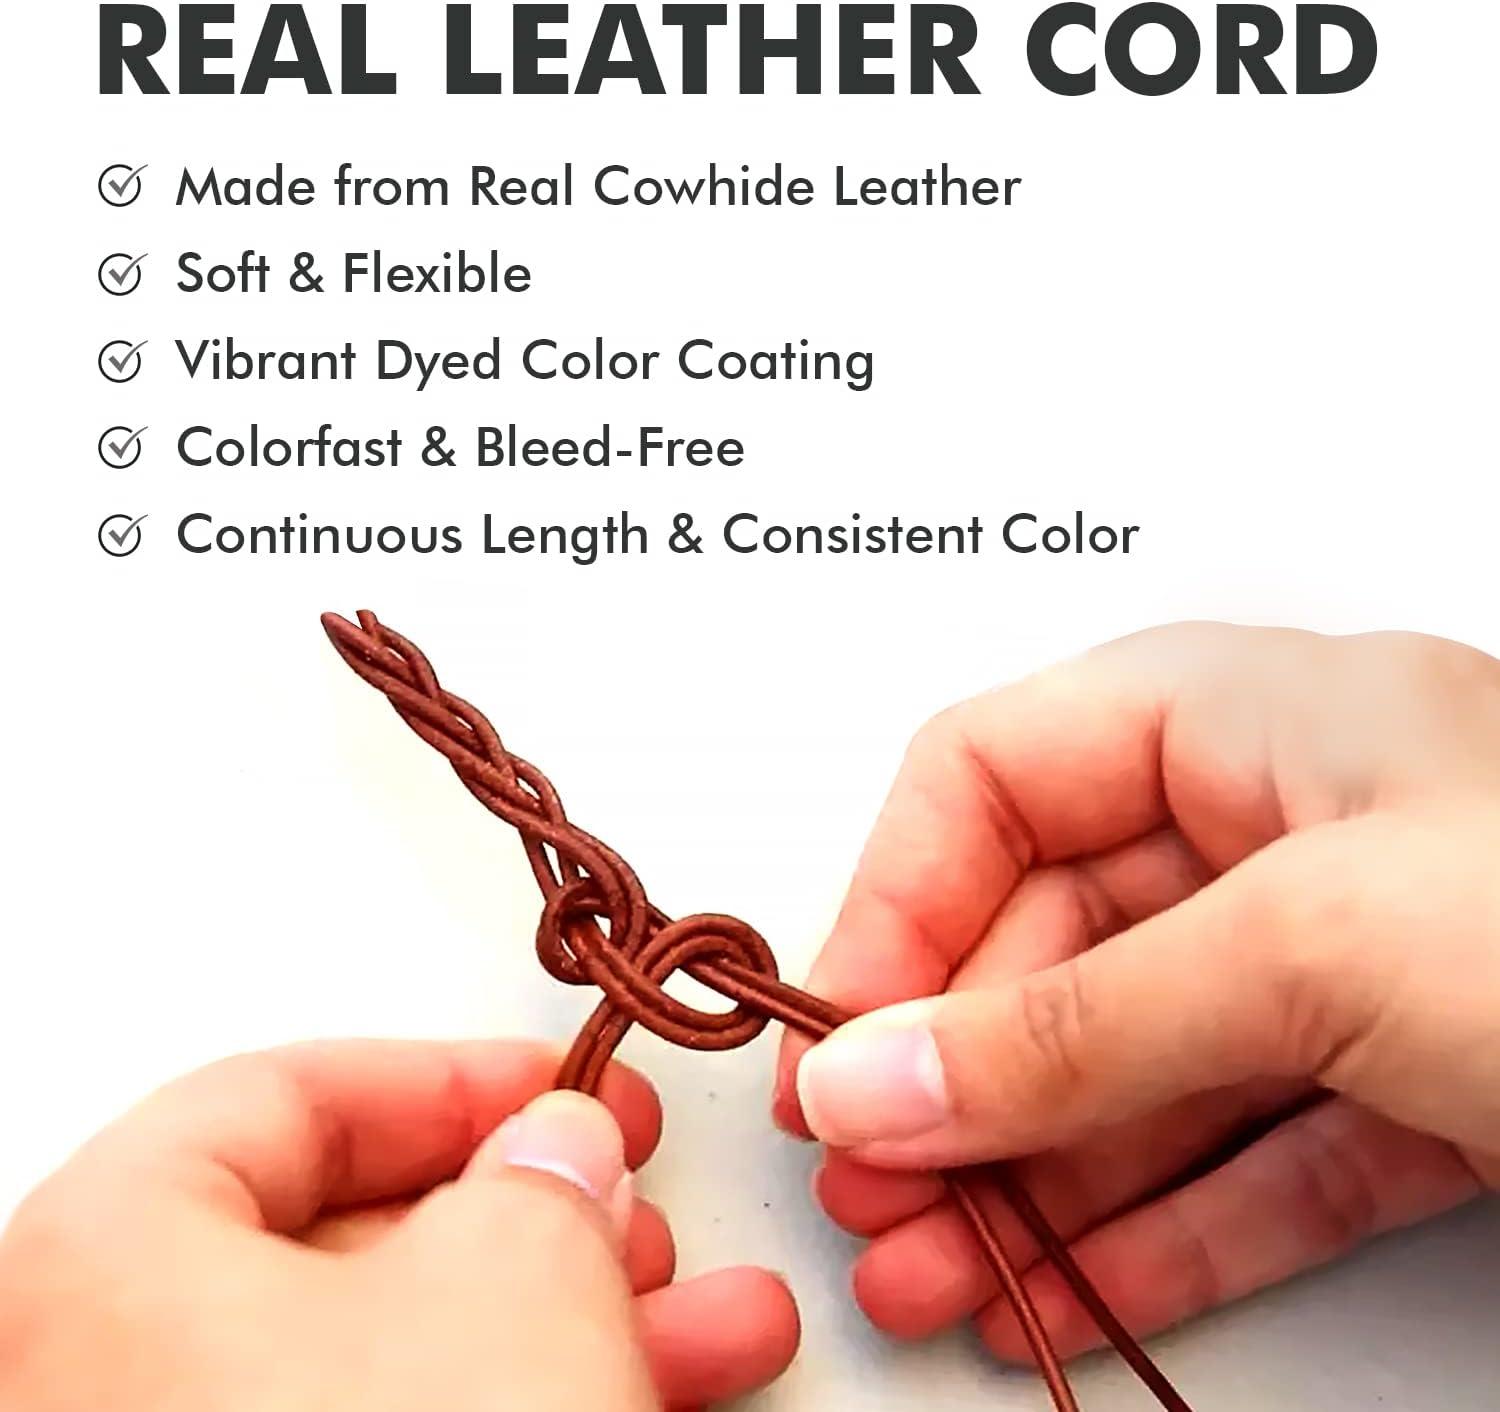 Round Leather Cord 2 mm for Craft & Jewelry Making, Natural Distressed  Grey, Leather String Cord for Jewelry Making, Leather Cording for Beading  Work